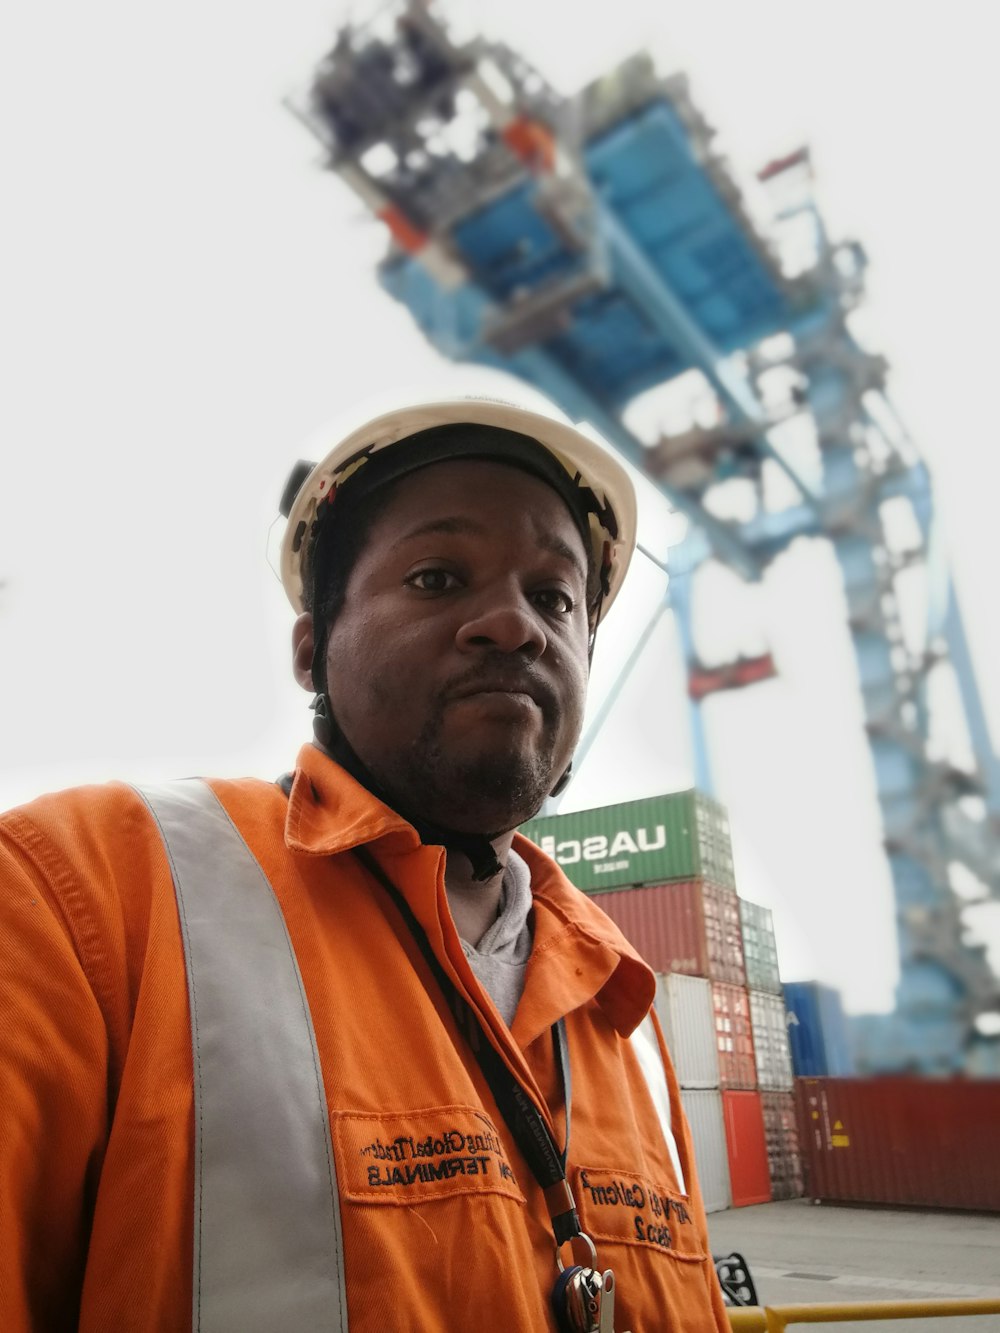 selective focus photography of man wearing hard hat and collared top